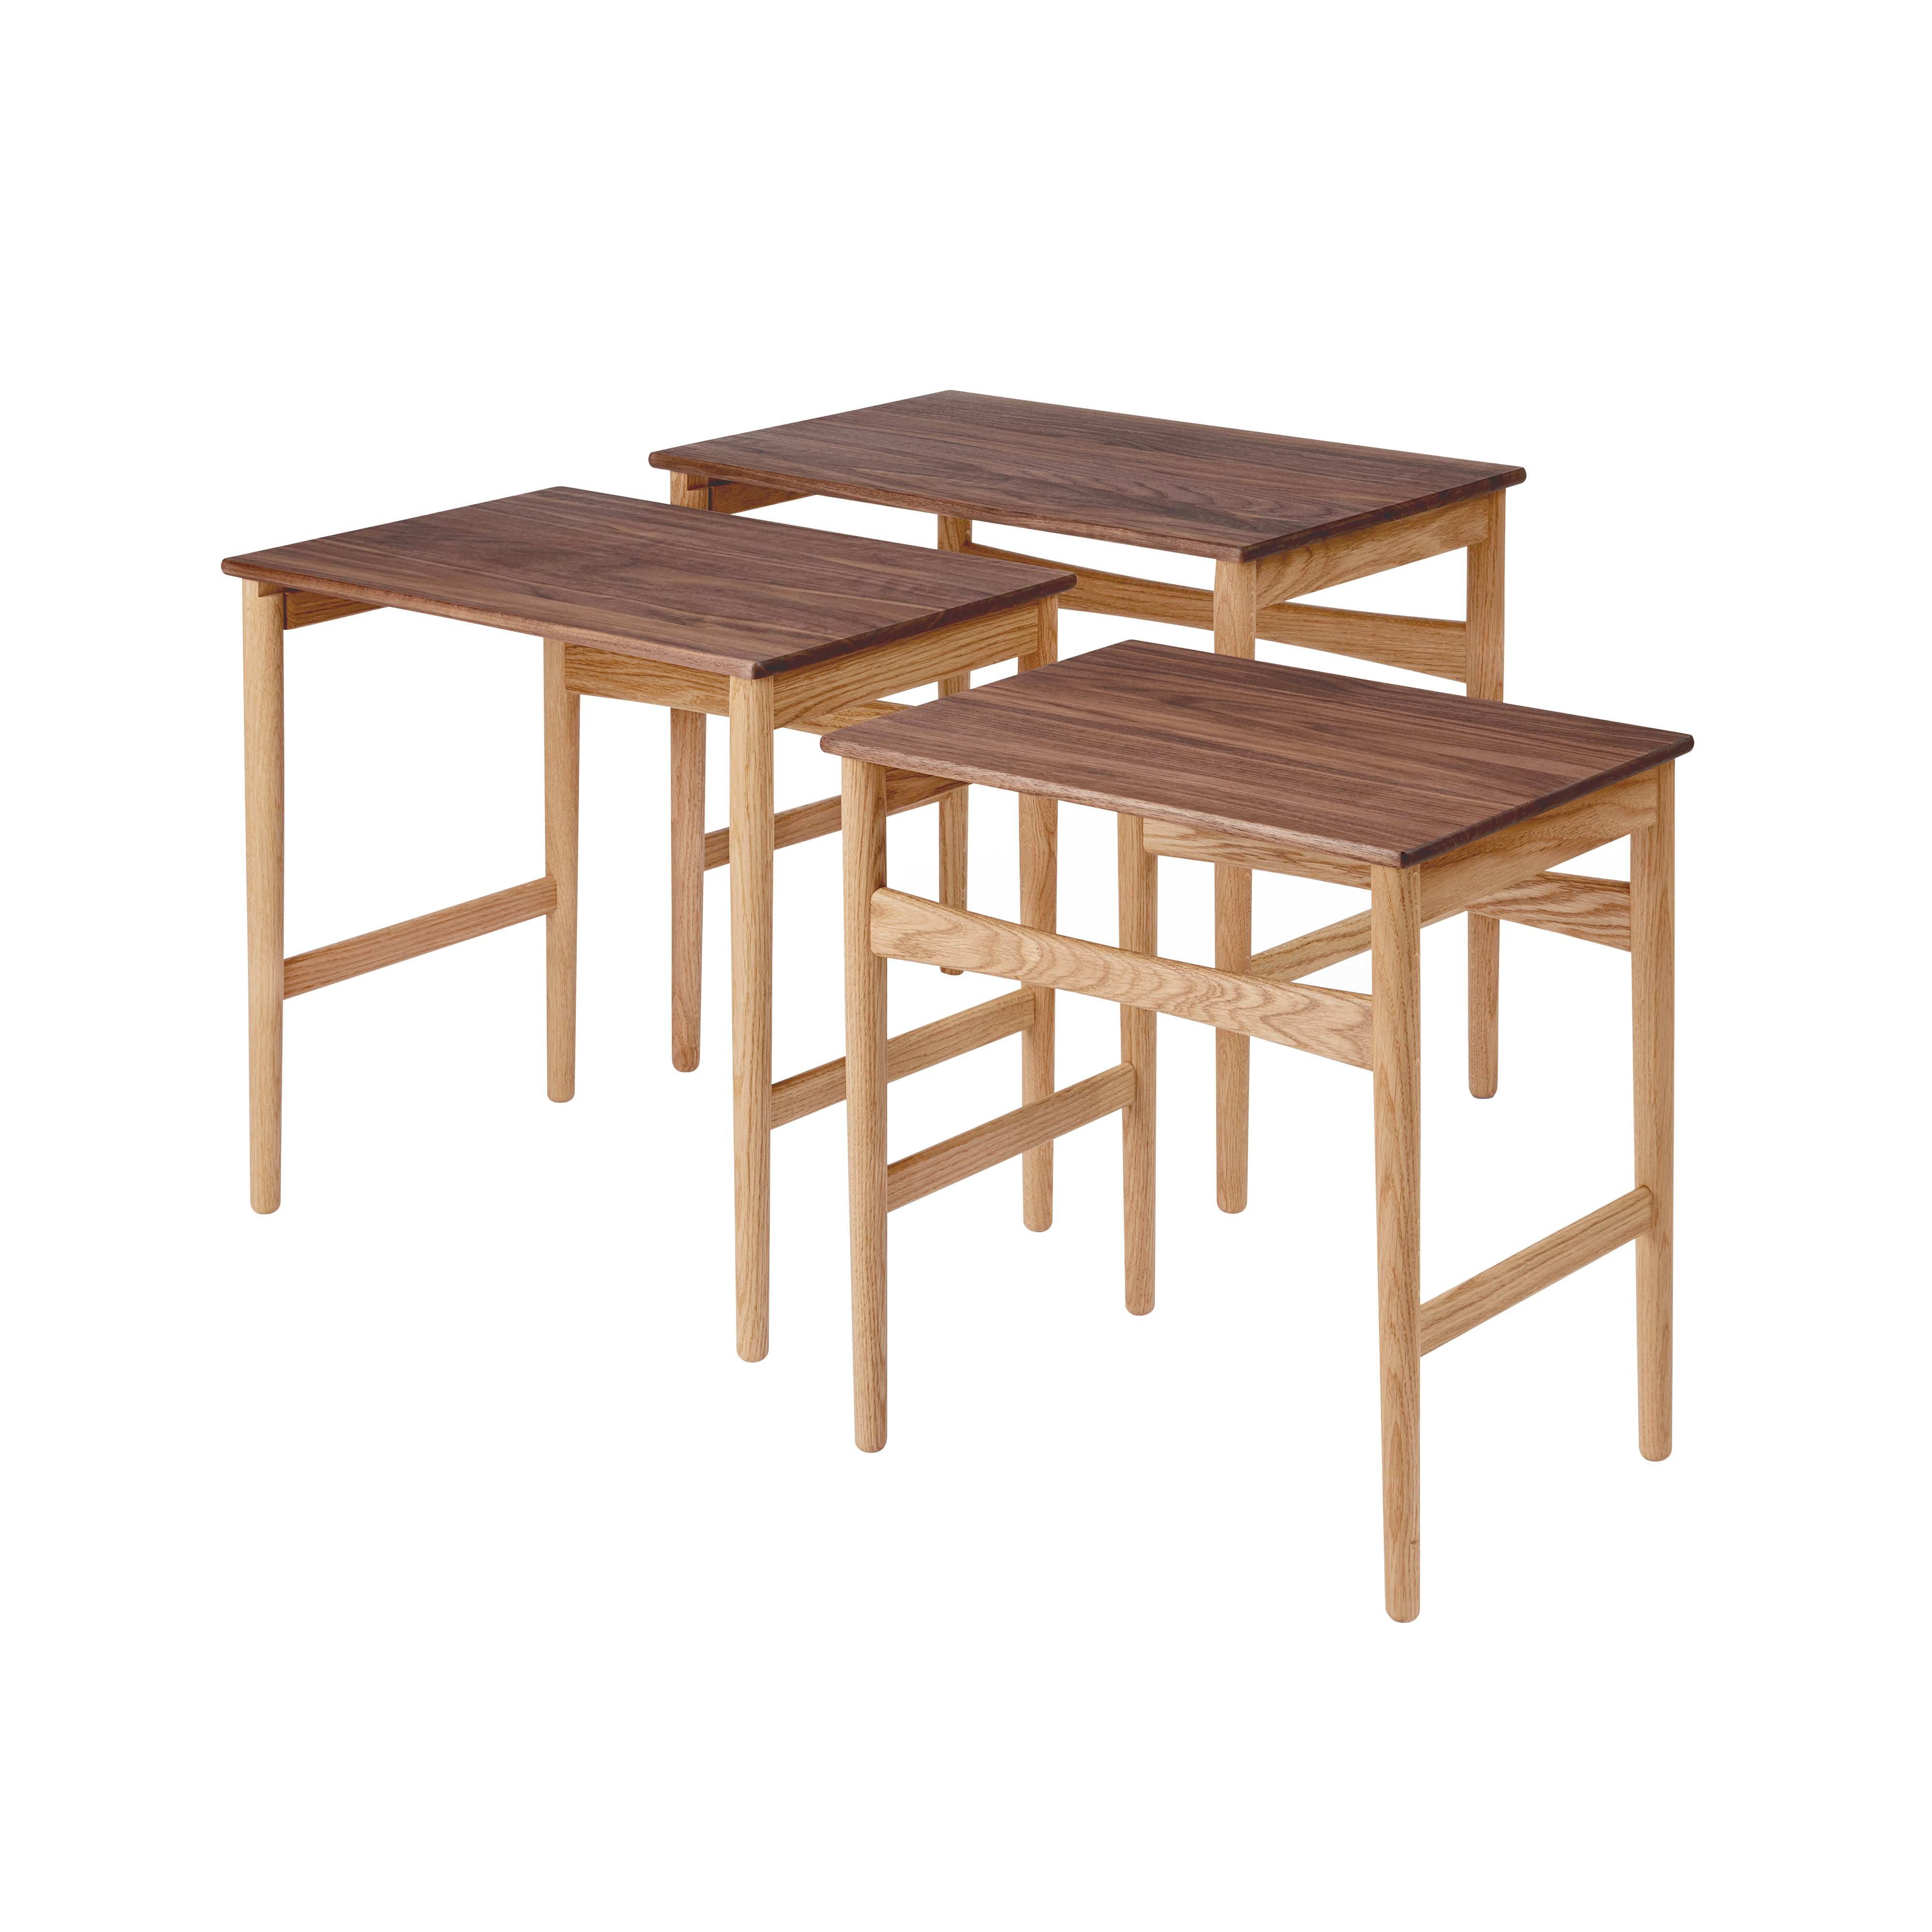 CH004 Nesting Tables: Set of 3 + Oiled Walnut + Oiled Oak